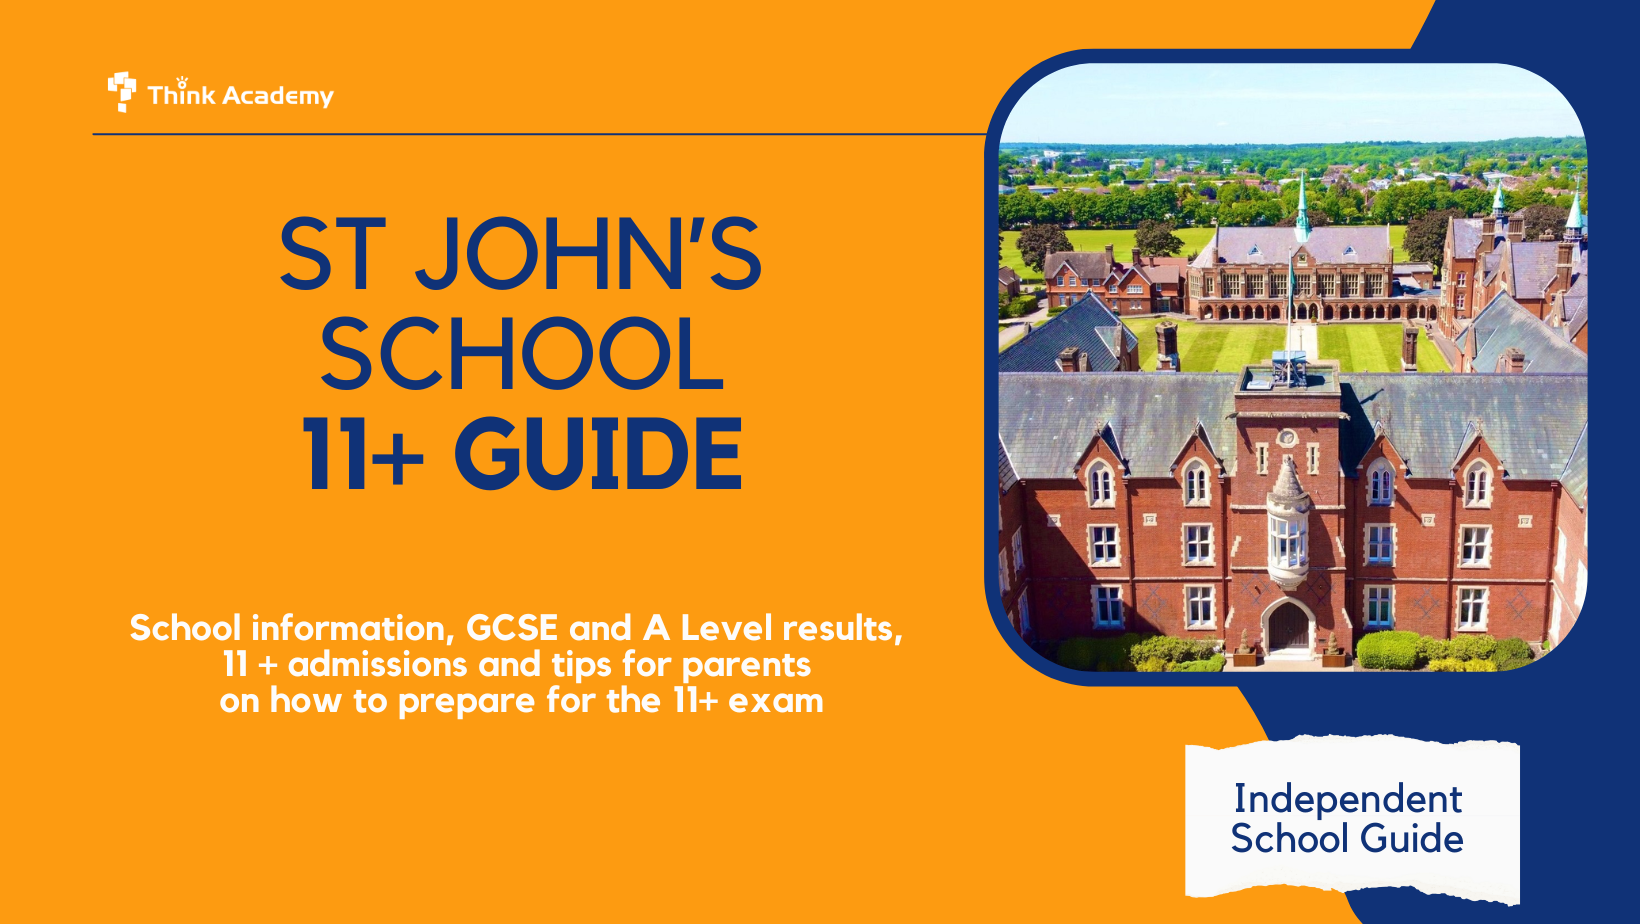 st-john-s-school-11-plus-guide-choosing-a-school-for-your-child